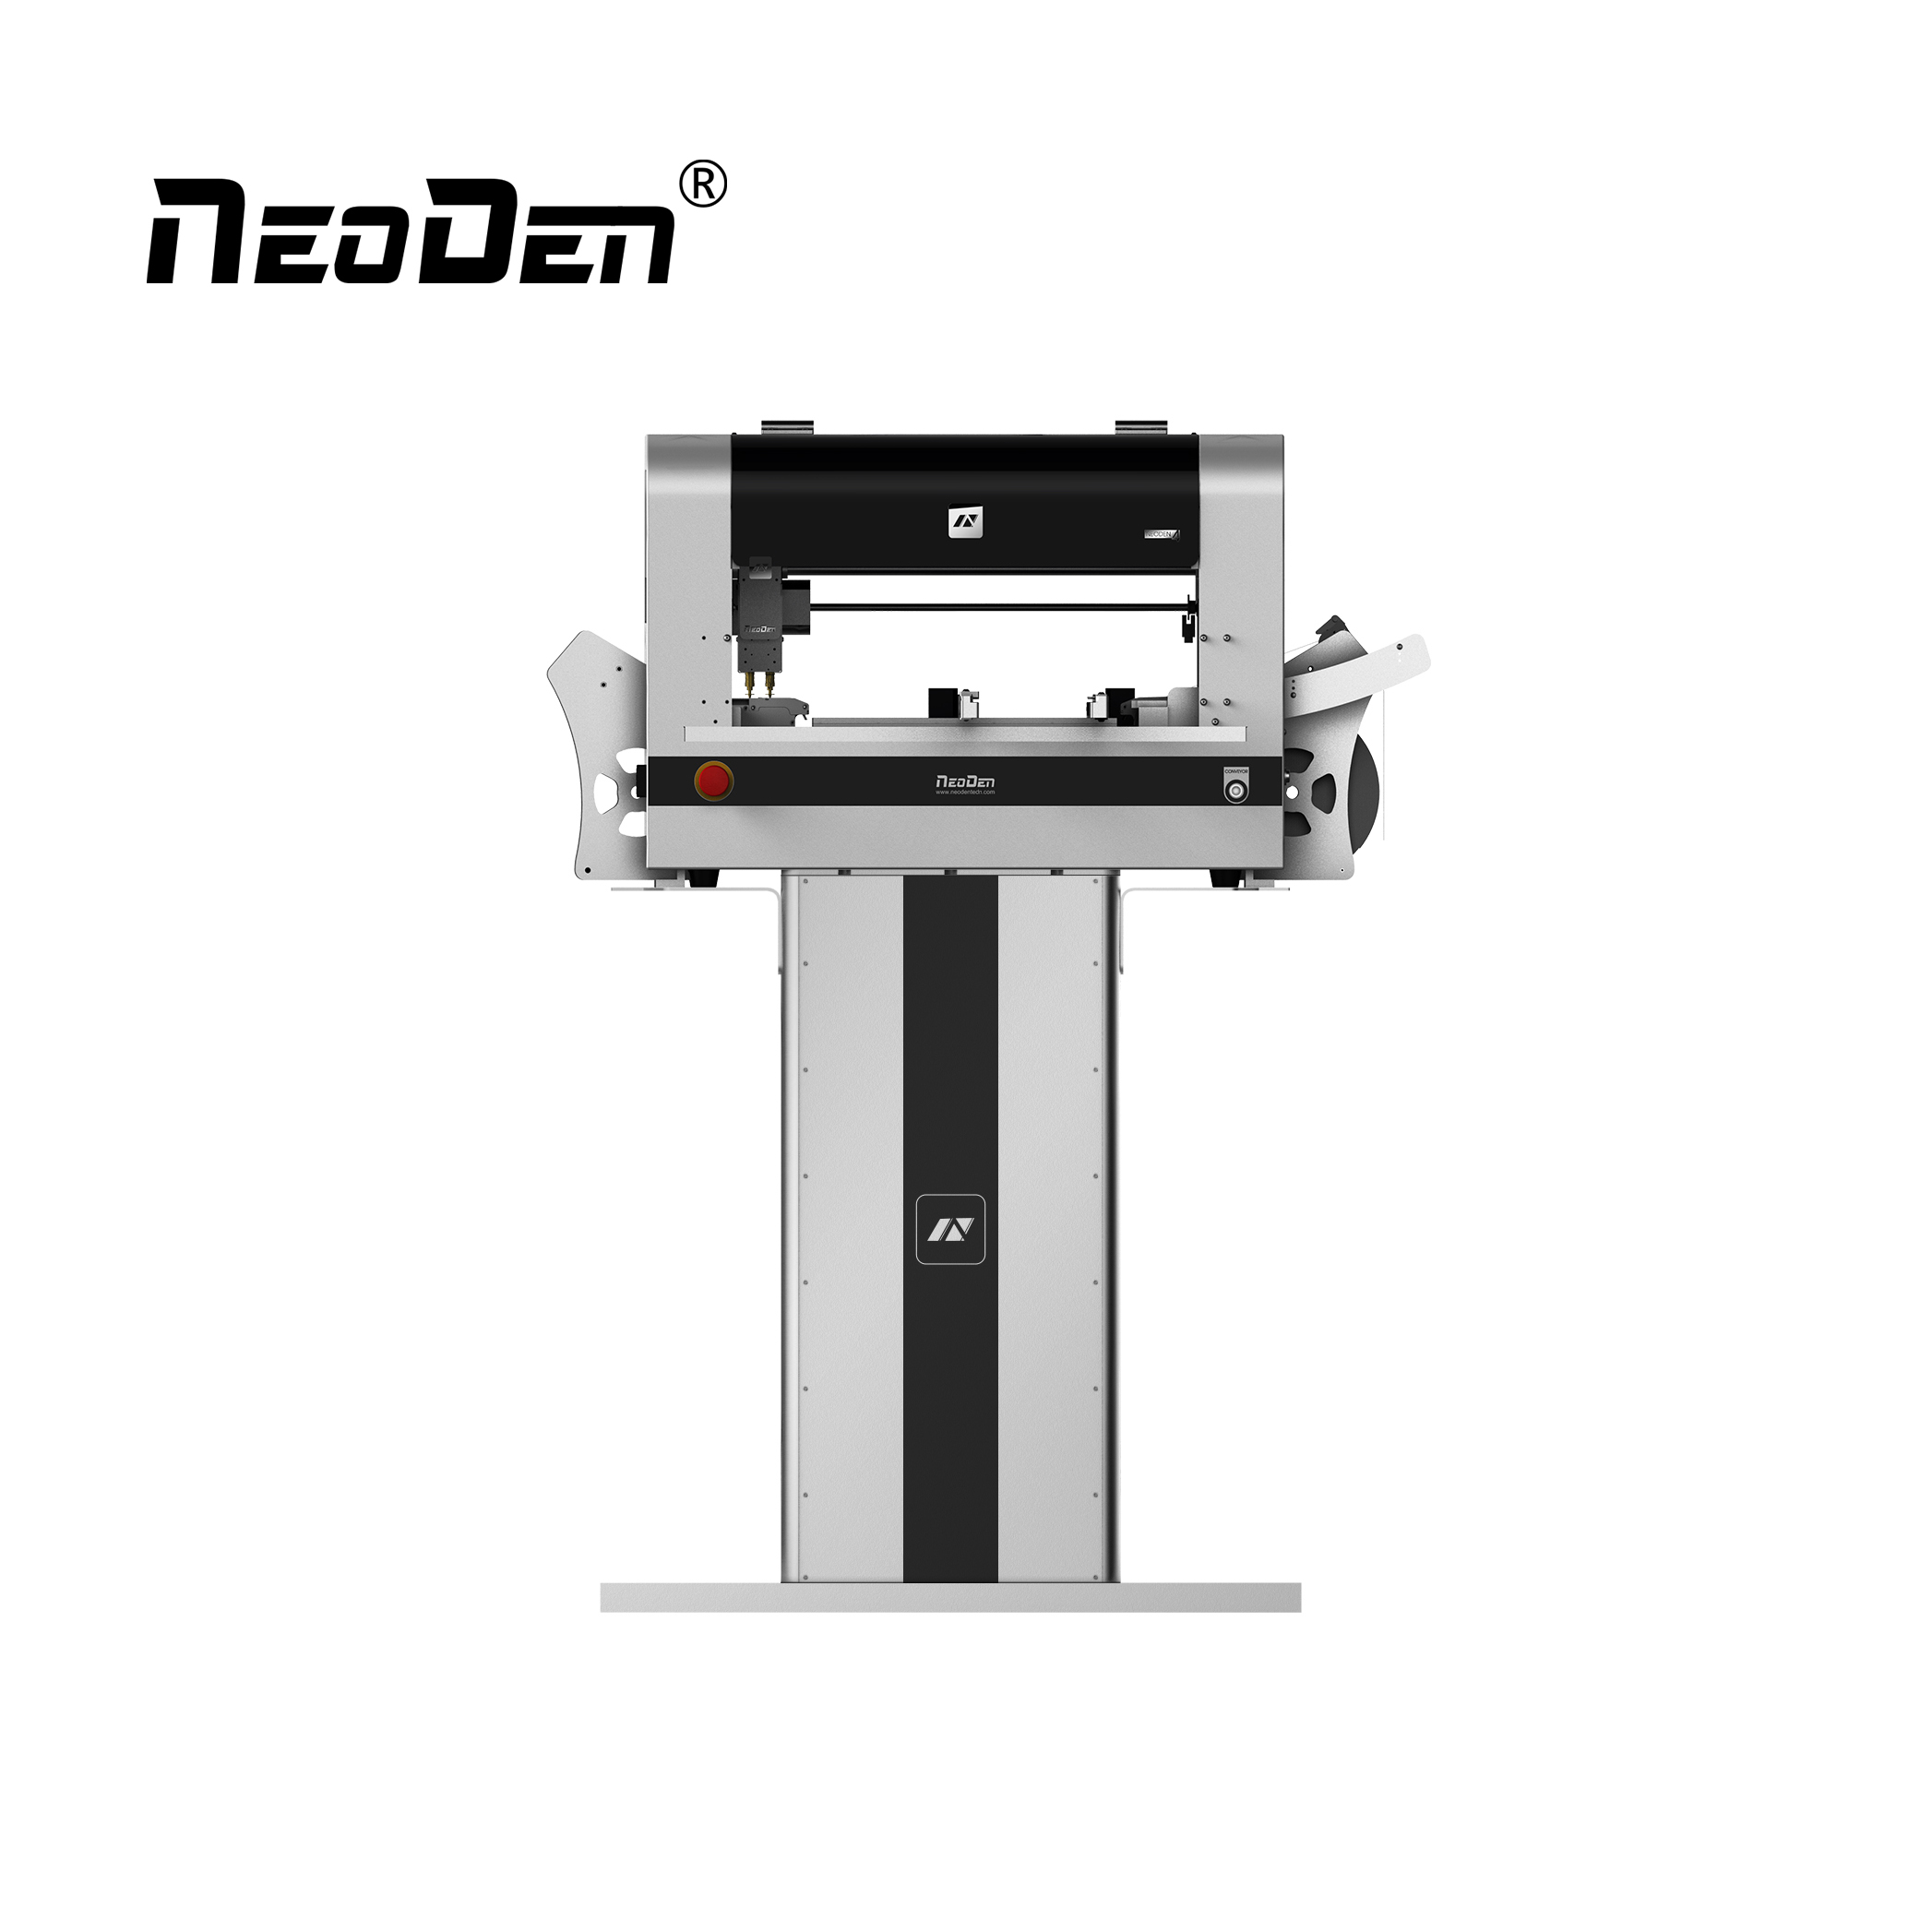 Best Price on Pcb Assembly Machine - NeoDen4 pick and place desktop machine – Neoden